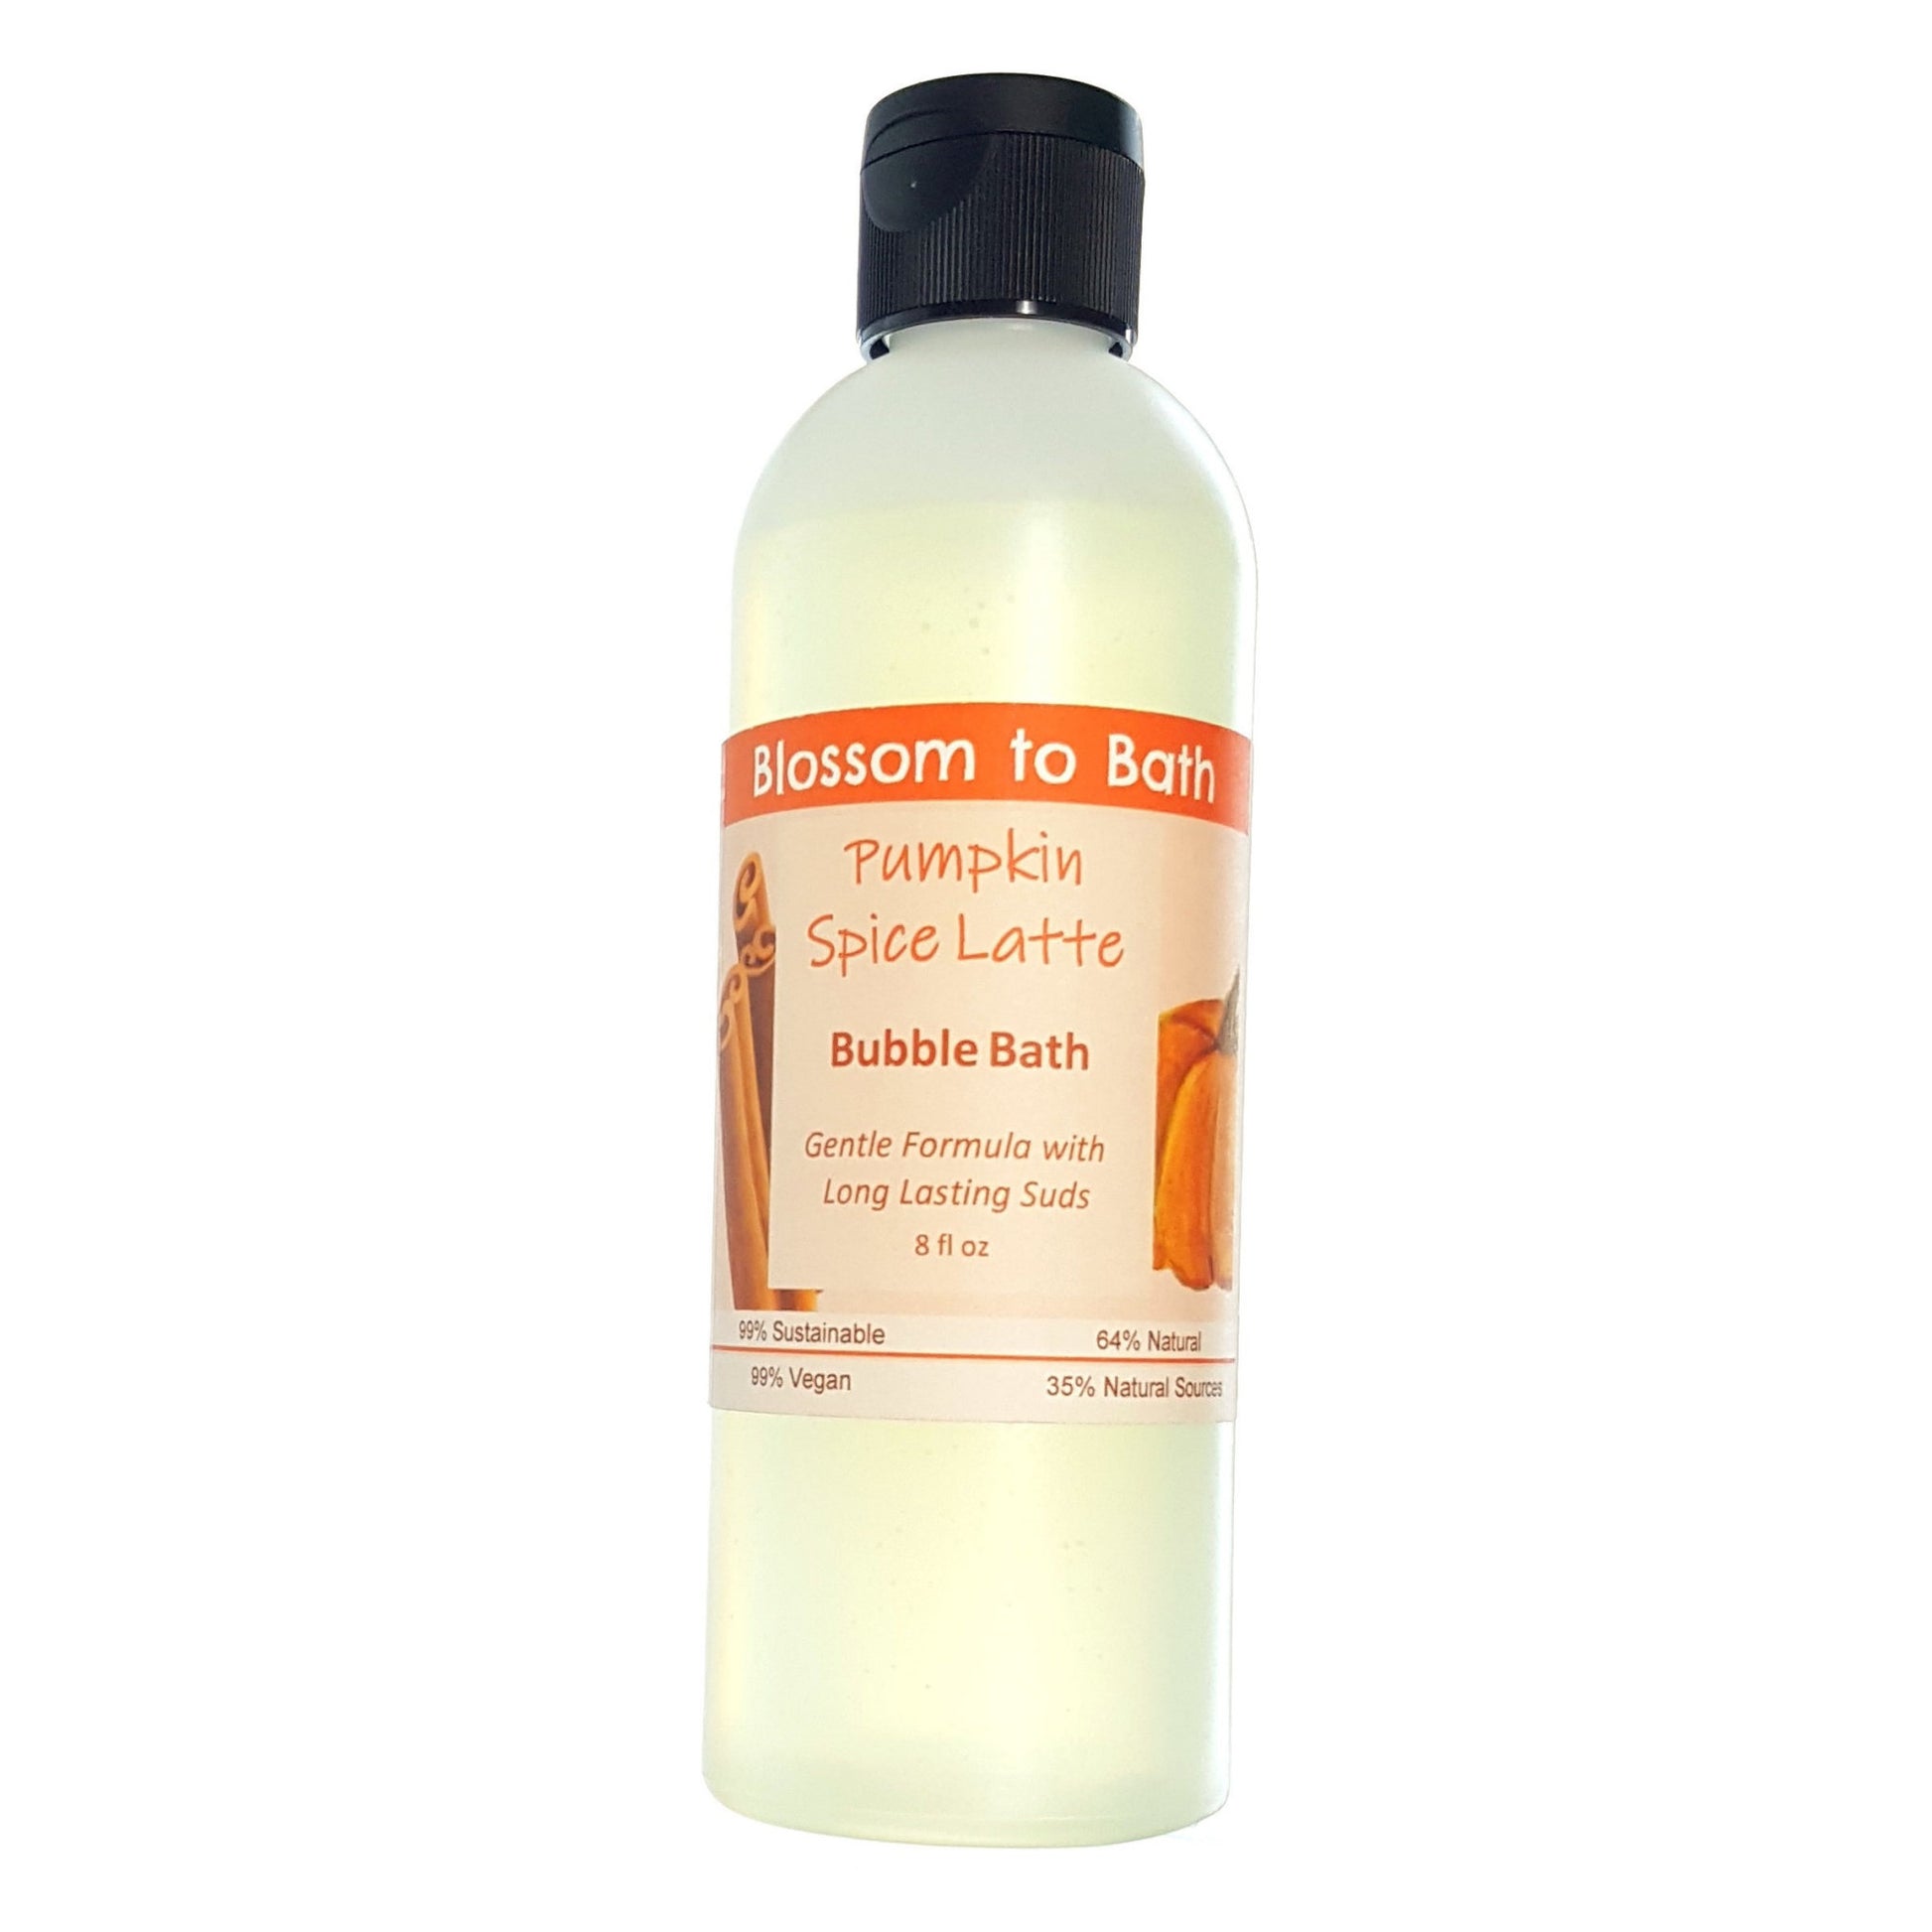 Buy Blossom to Bath Pumpkin Spice Latte Bubble Bath from Flowersong Soap Studio.  Lively, long lasting  bubbles in a gentle plant based formula for maximum relaxation time  Deep vanilla and lightly fruited spice blend seamlessly with rich coffee.